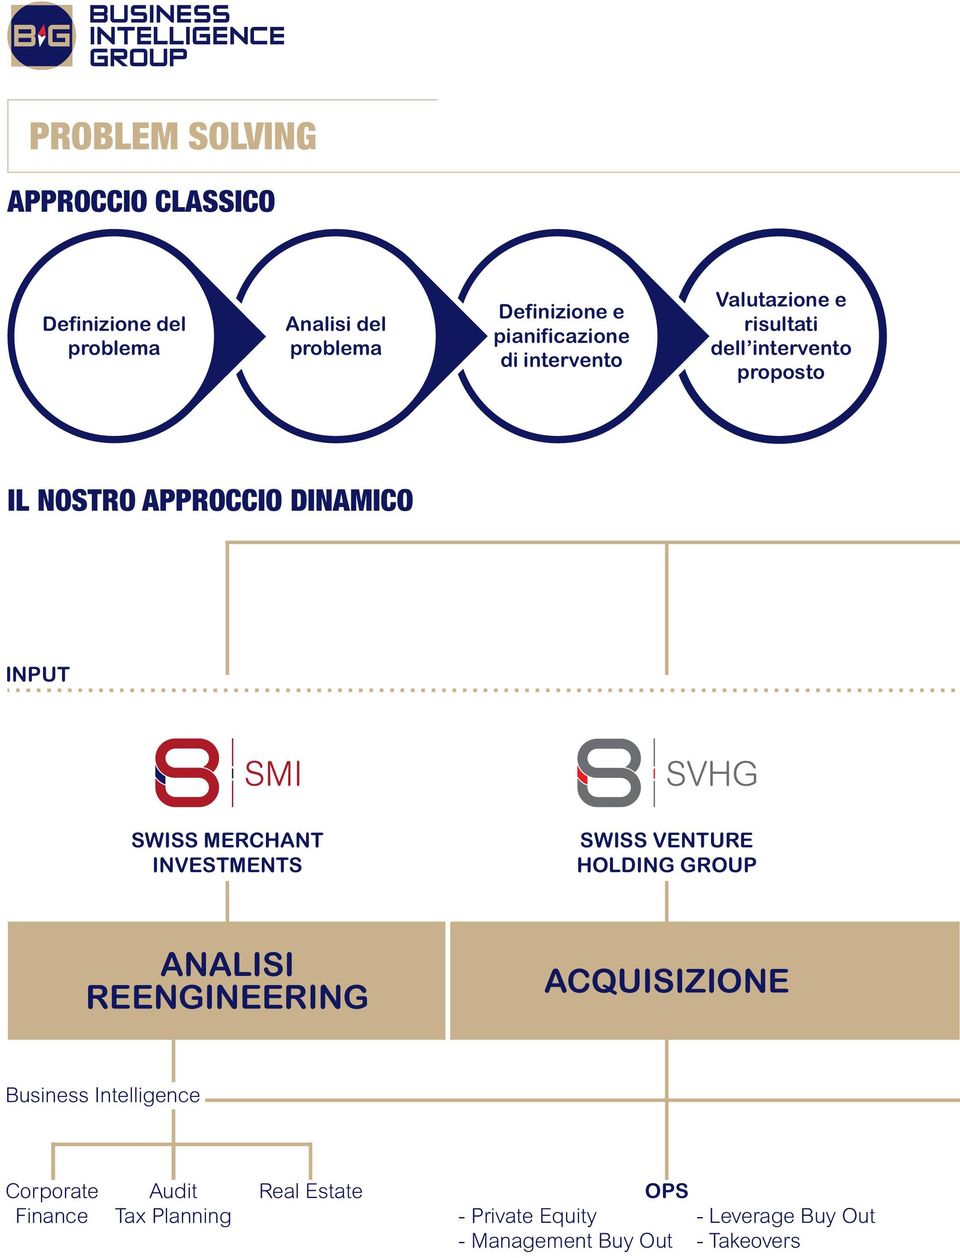 MERCHANT INVESTMENTS SWISS VENTURE HOLDING GROUP ANALISI REENGINEERING ACQUISIZIONE Business Intelligence